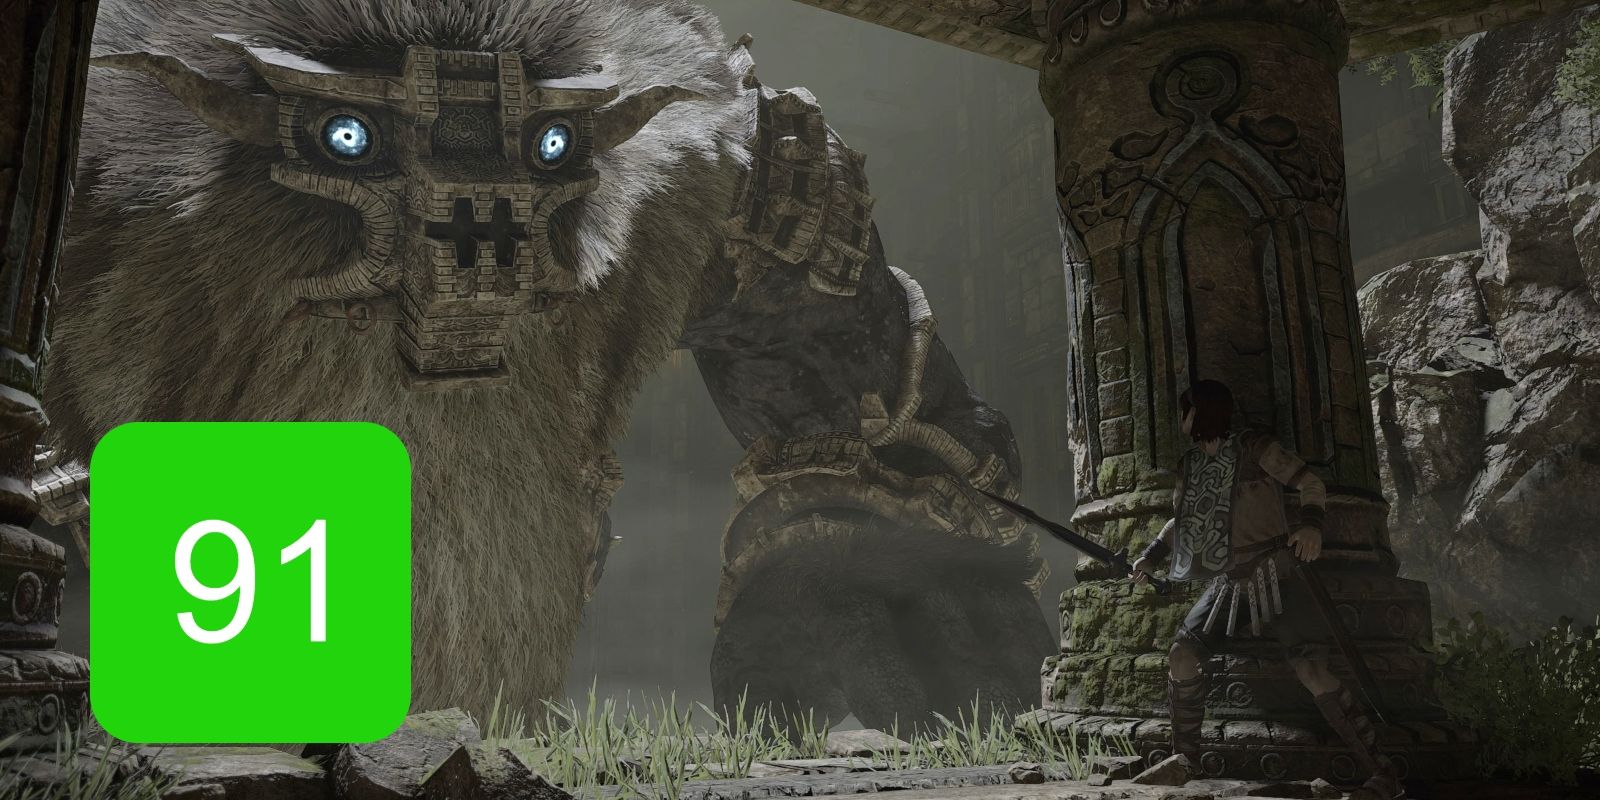 The ps4 metascore for Shadow of the Colossus, featuring the main character and one of the colossi